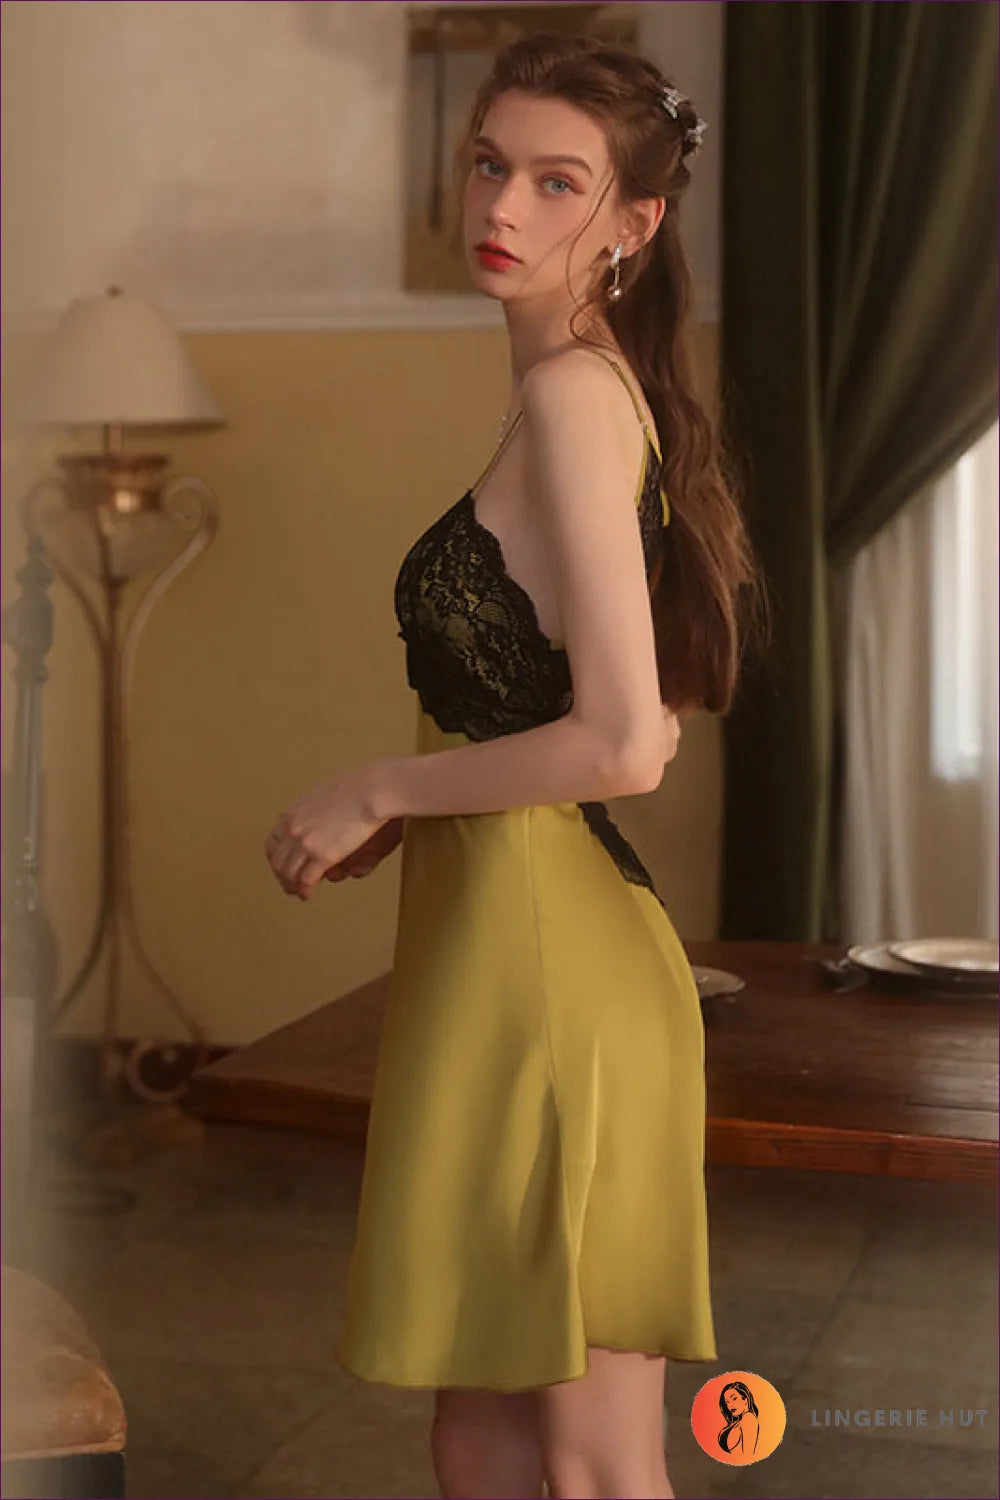 Elevate Your Look With Our Satin Backless Nightdress. Classic Satin Finish, V-neckline, Lace Trim,